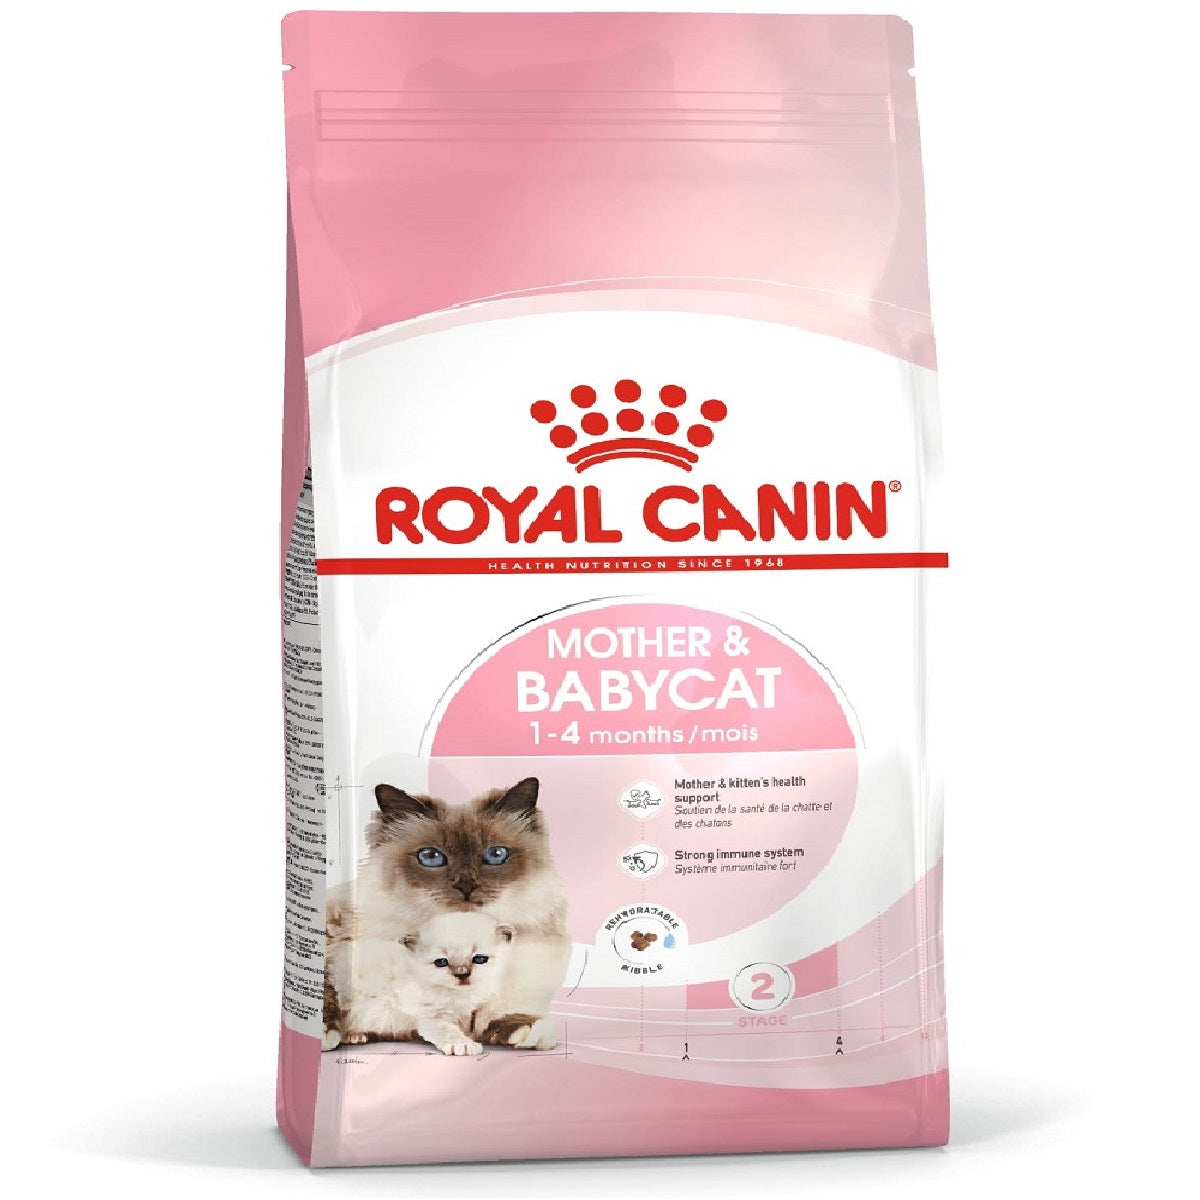 ROYAL CANIN - Mother & Babycat